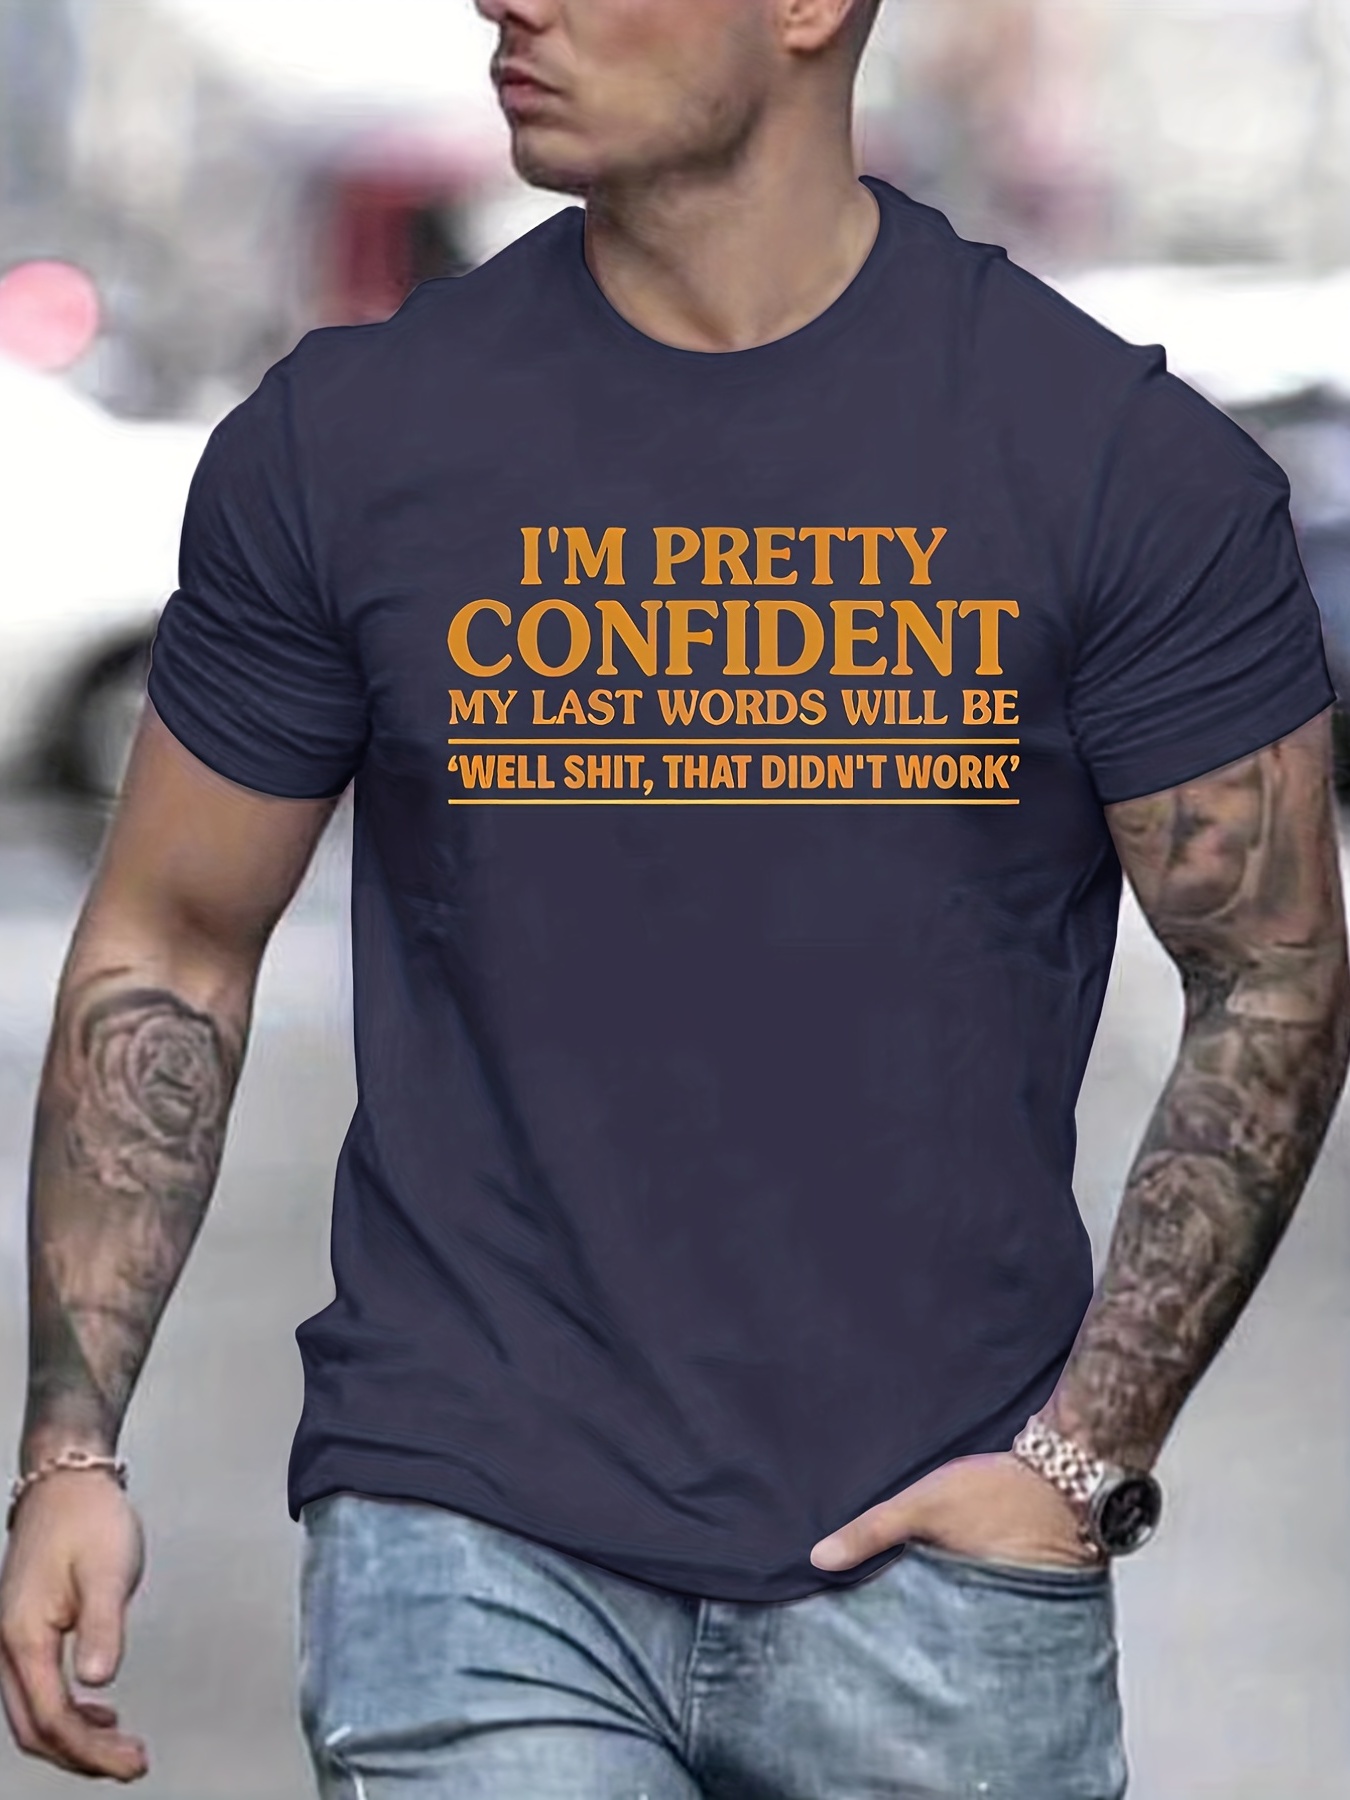 powerful slogan print mens graphic design crew neck t shirt casual comfy tees t shirts for summer mens clothing tops details 5